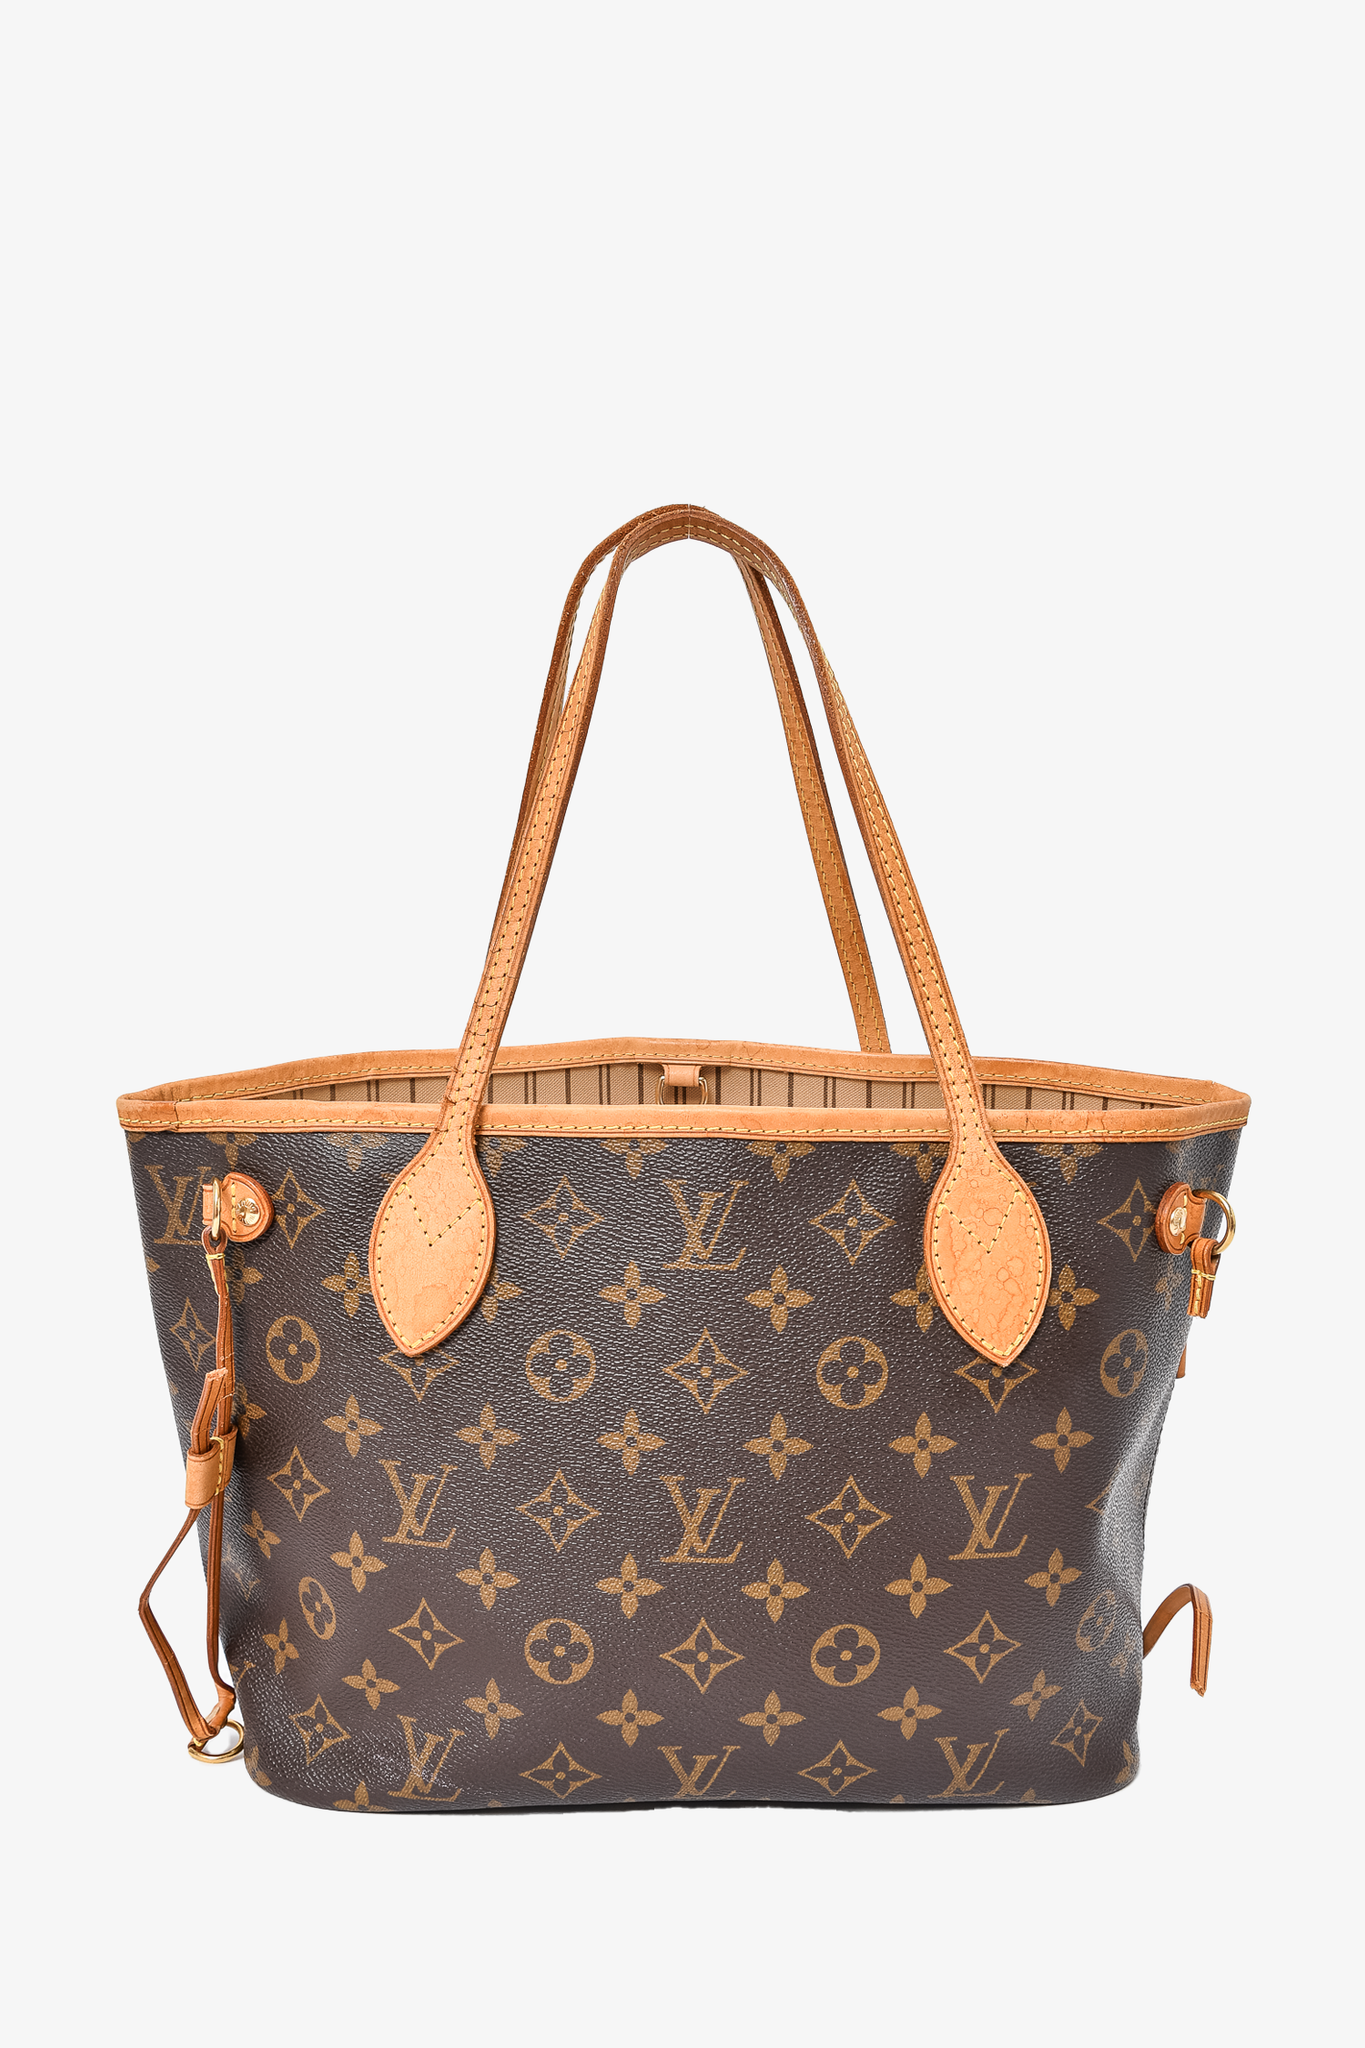 Louis Vuitton x Fornasetti Neverfull MM Monogram Cameo Brown in